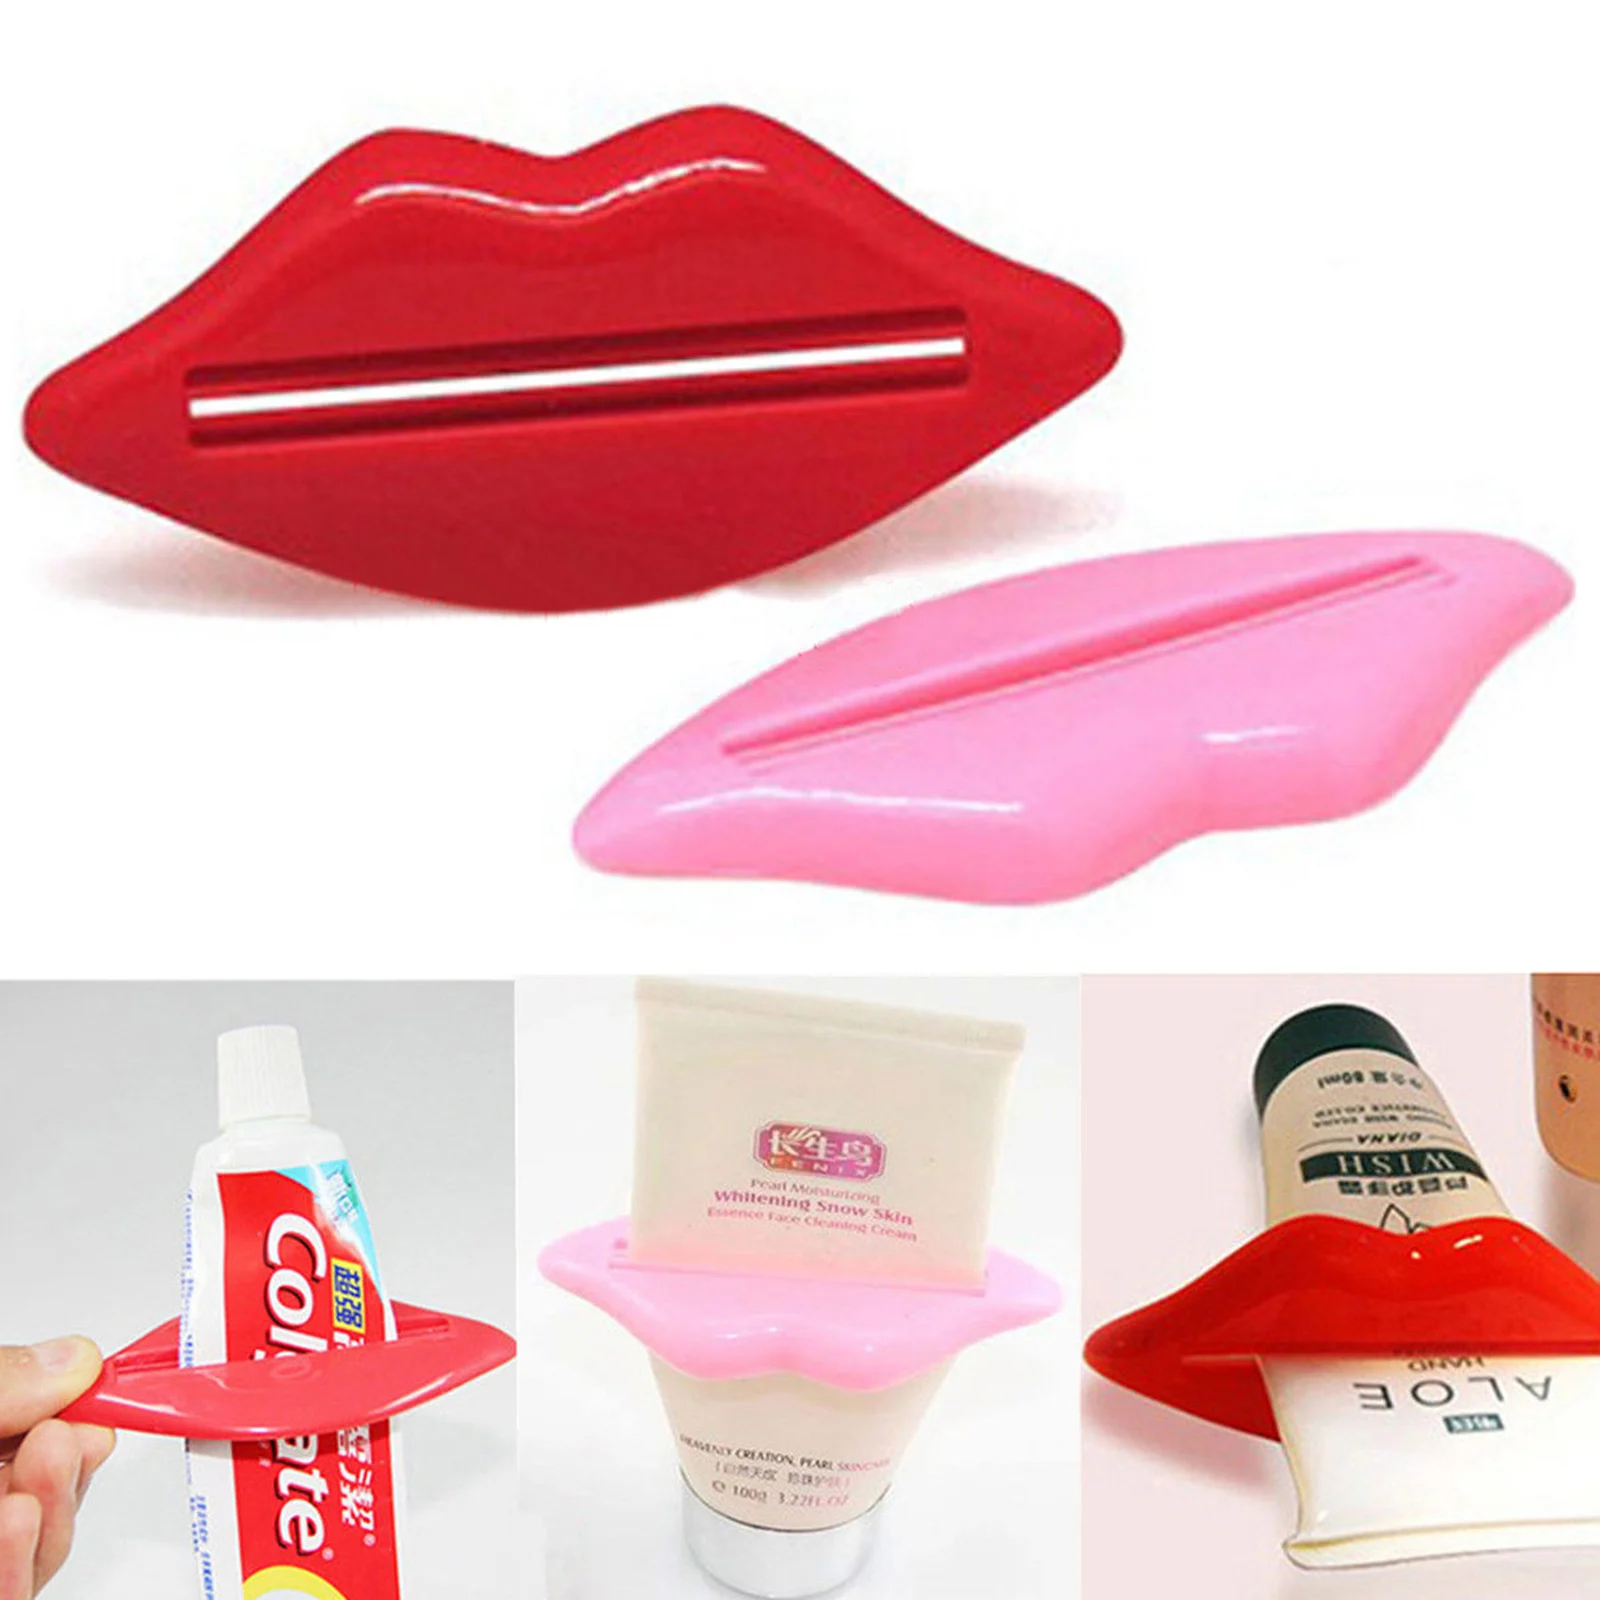 

New Fun Lips Plastic Tooth Paste Dispenser Holder Rolling Tube Squeezer Toothpaste Bathroom Accessory Supplies Random Color